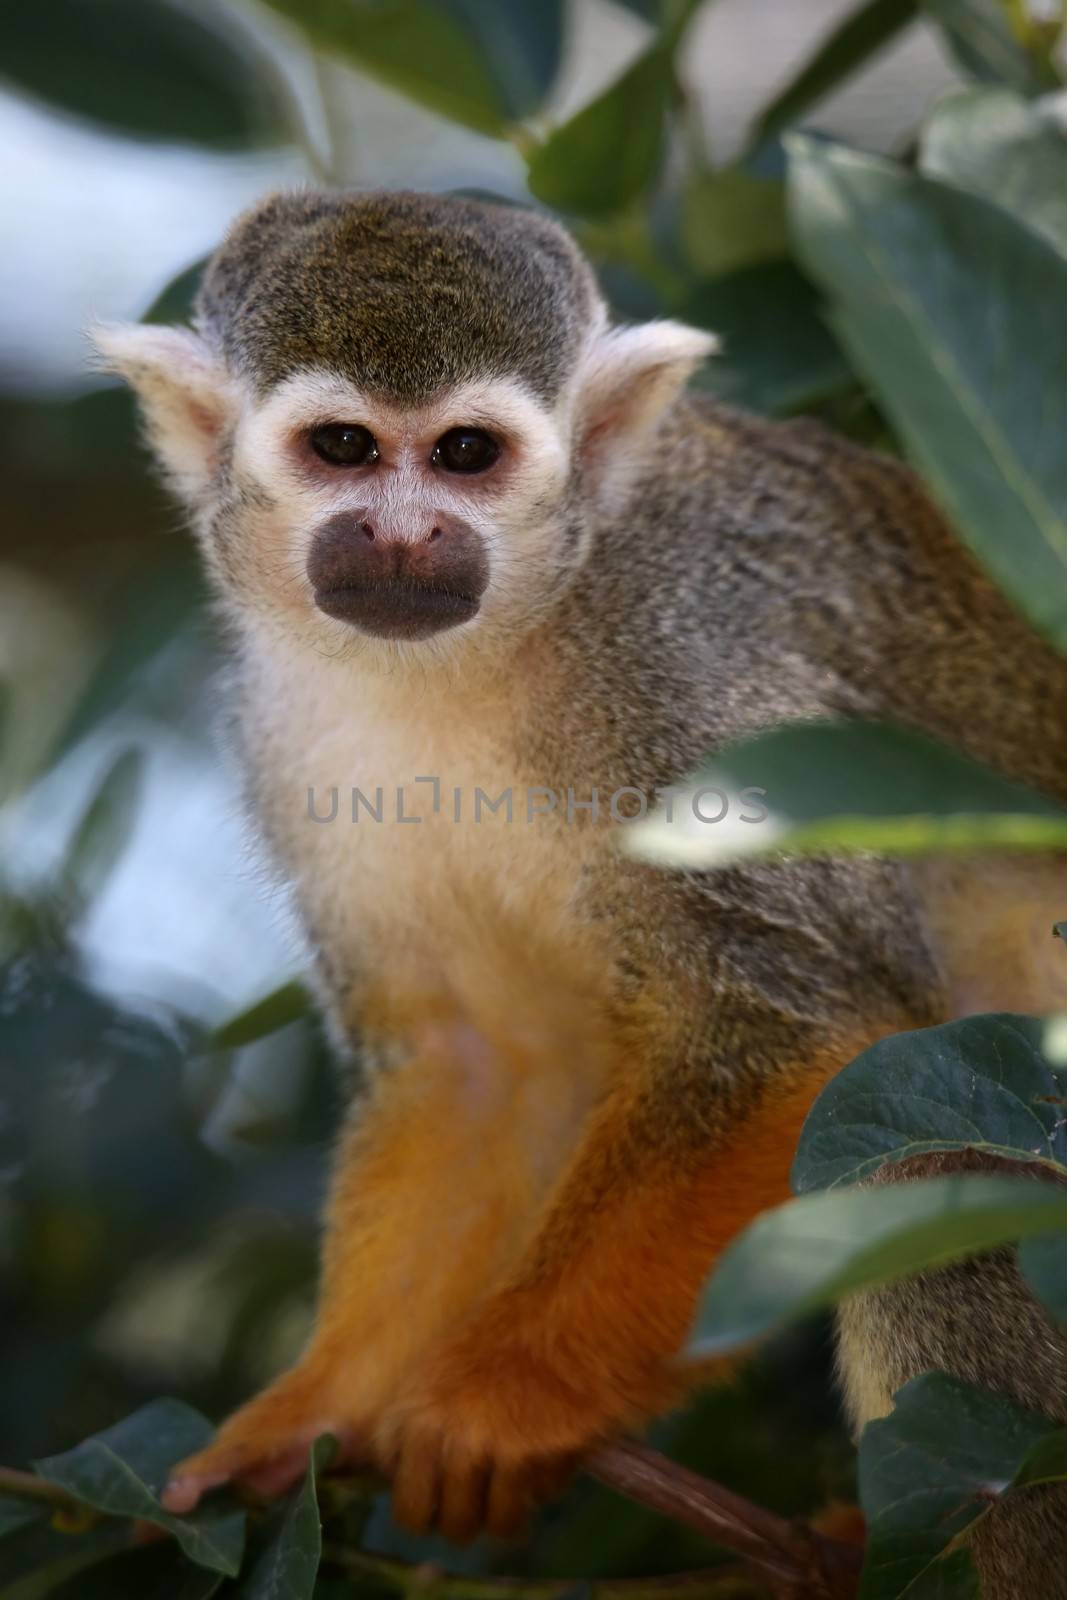 Cute squirrel monkey looking out between the leaves of a tree